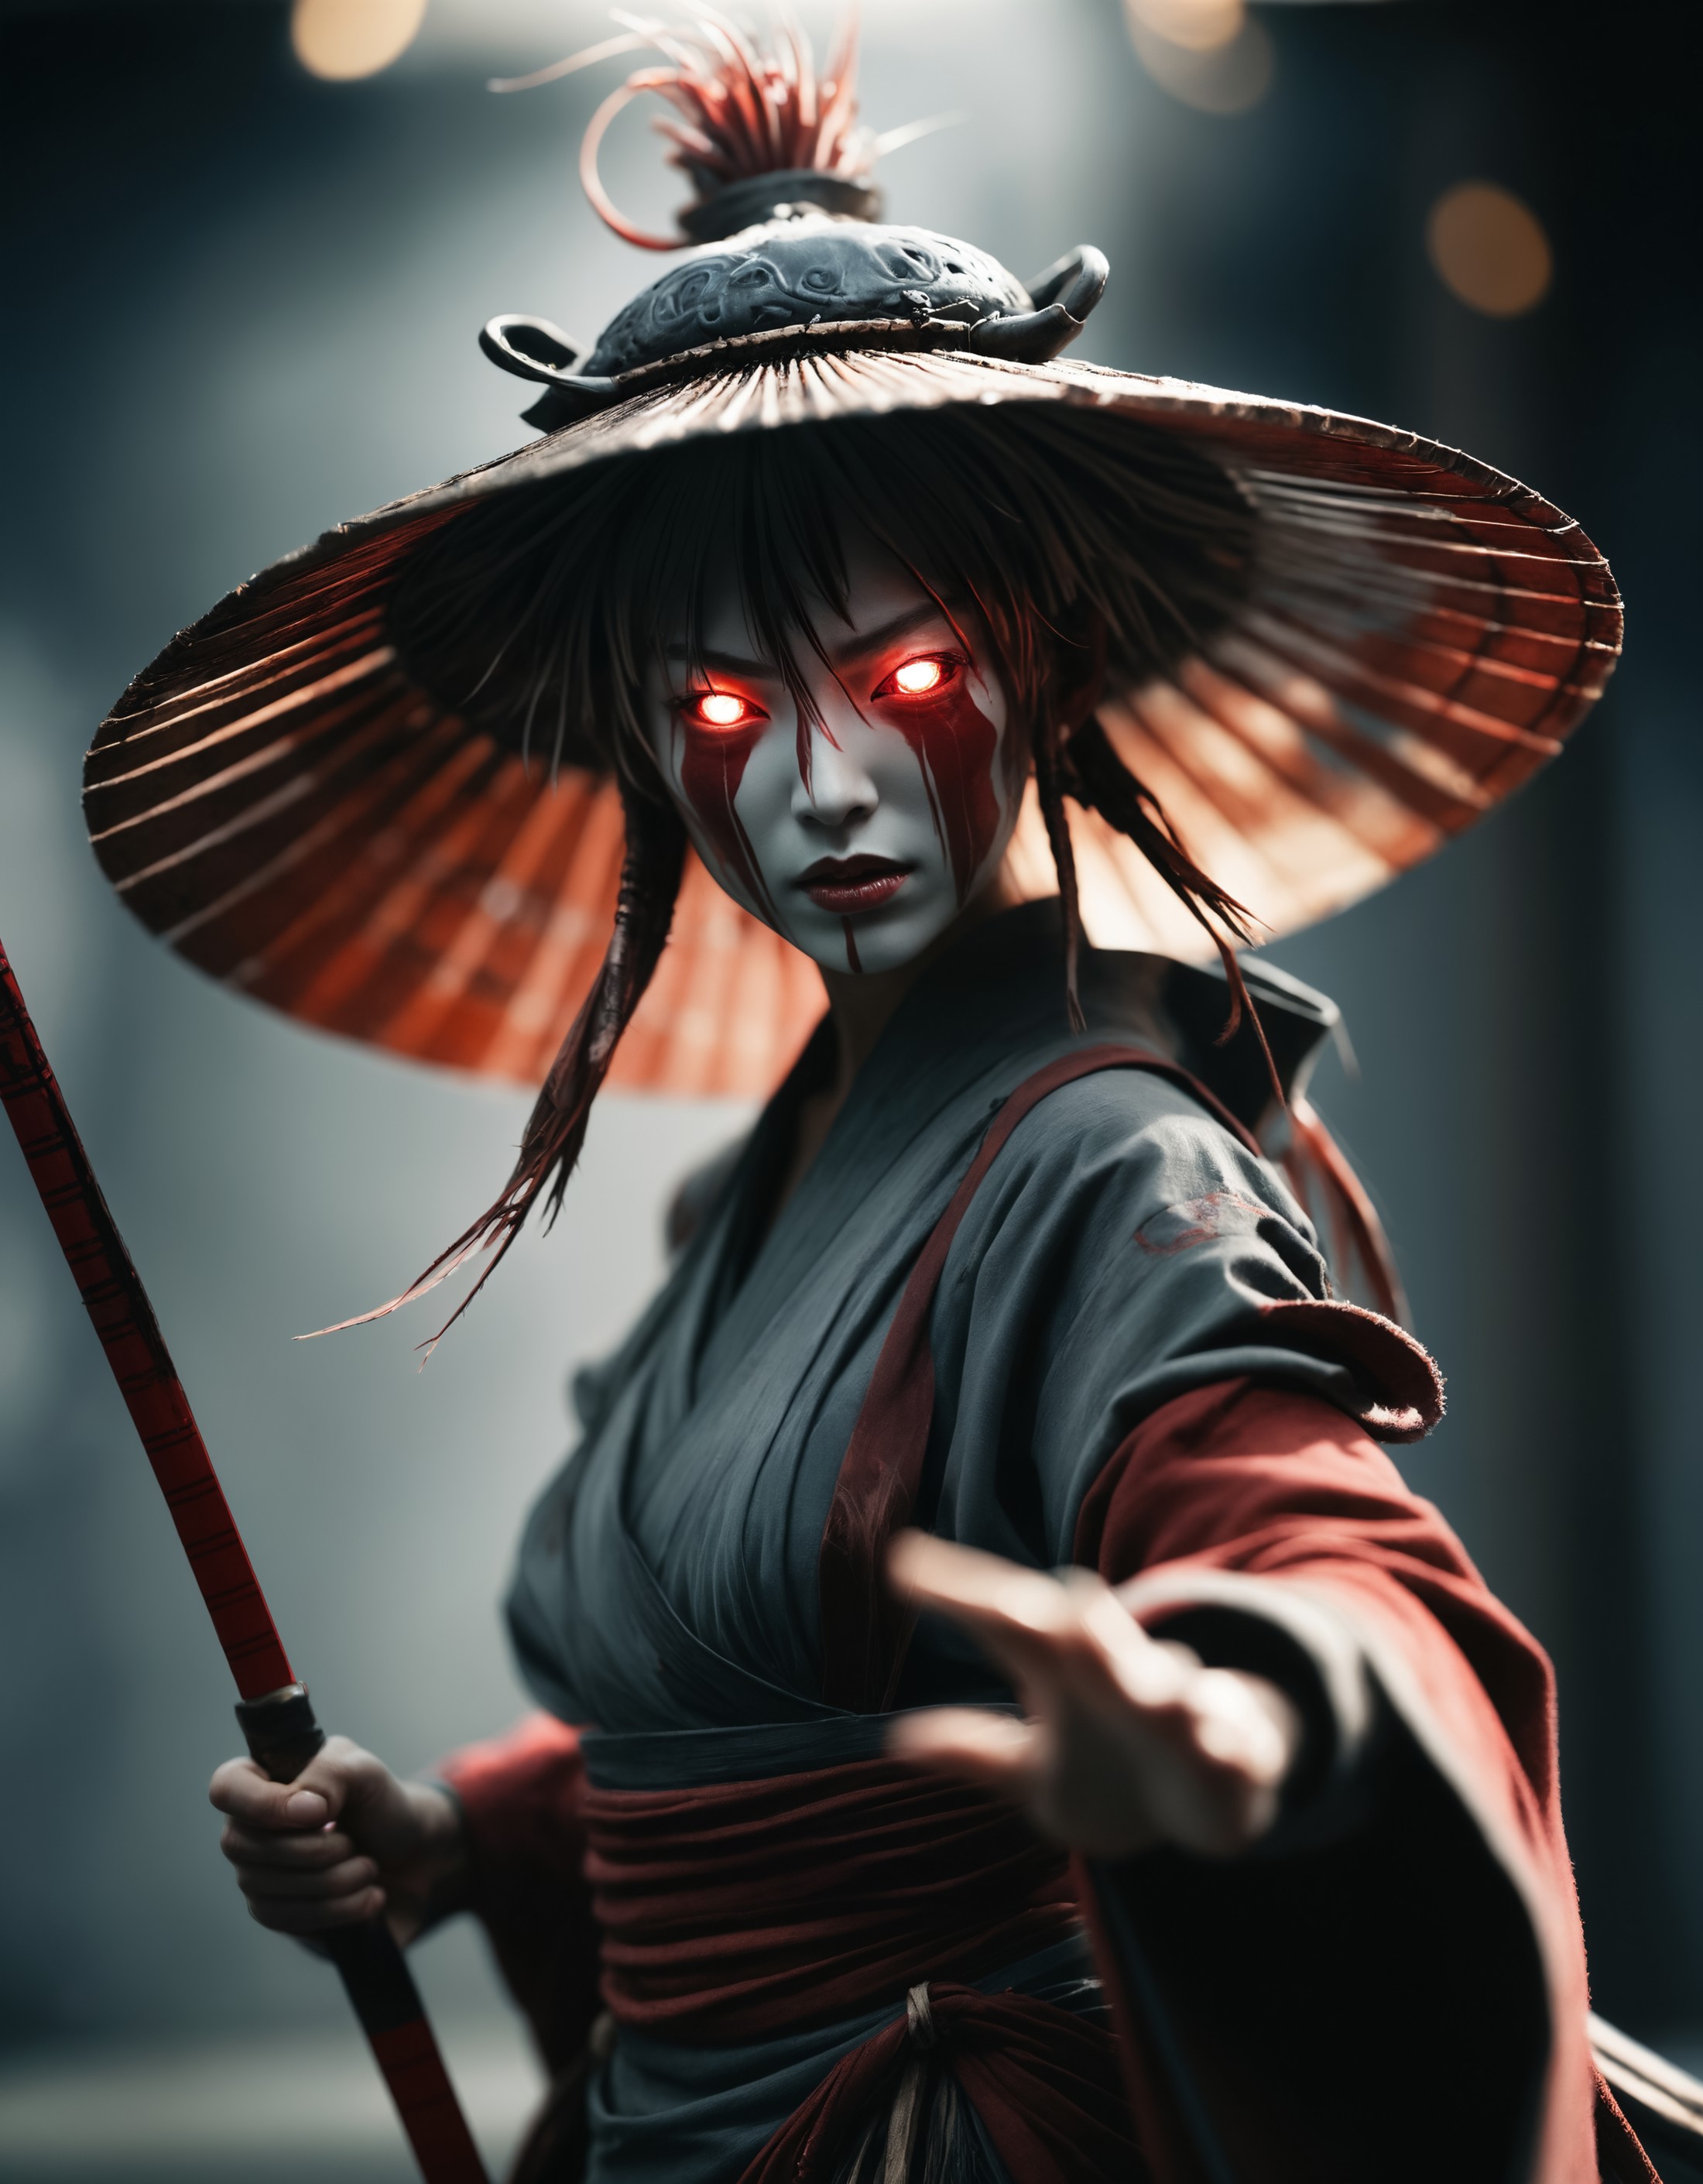 Capture the essence of a weathered old and worn-out female cyborg samurai amidst (swirling magical whisps). Bent forward, ...